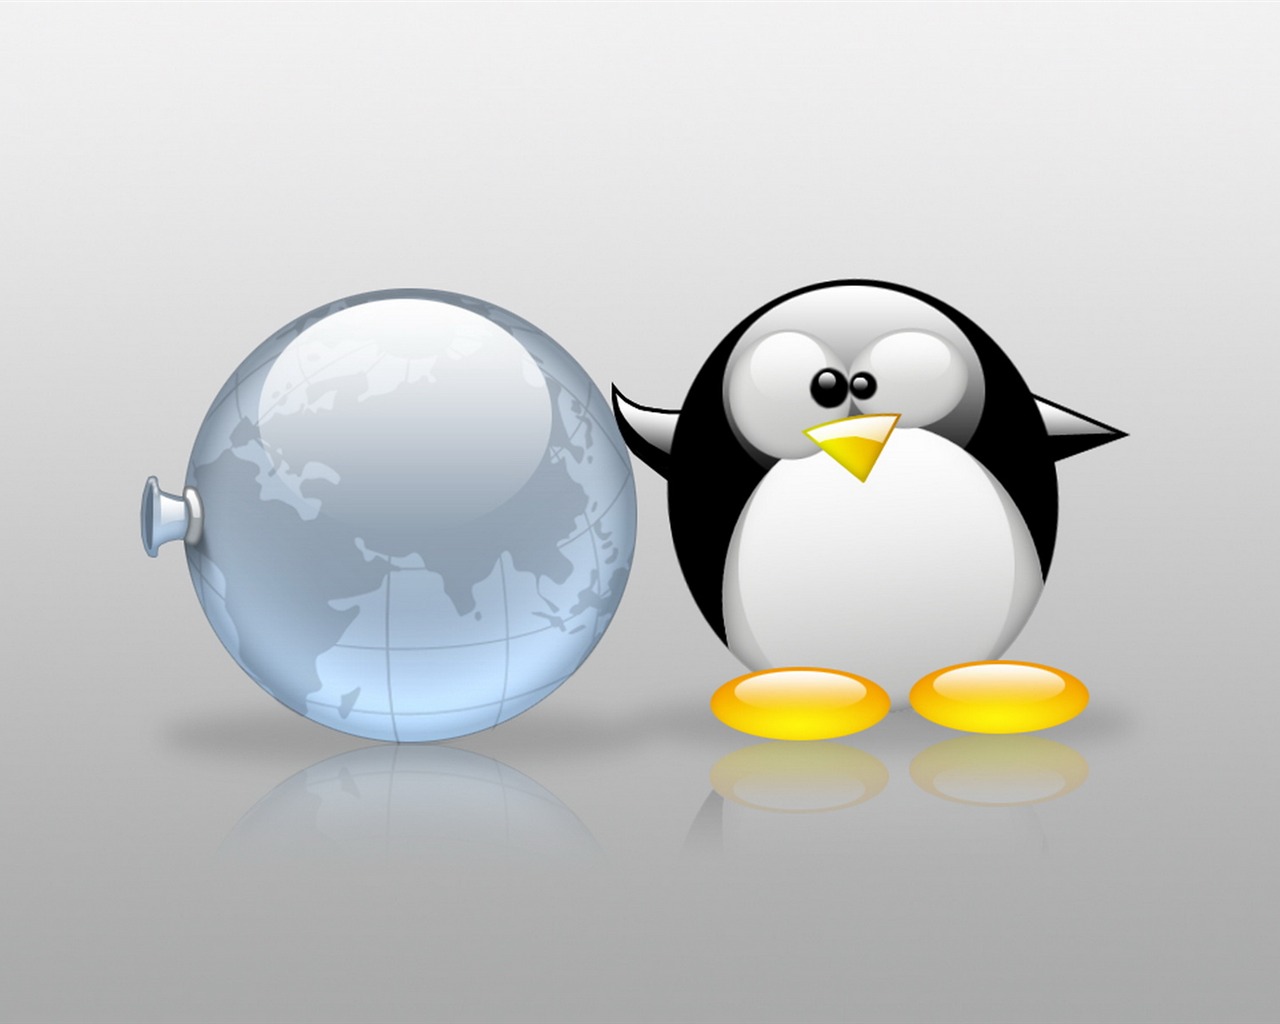 Linux tapety (2) #16 - 1280x1024